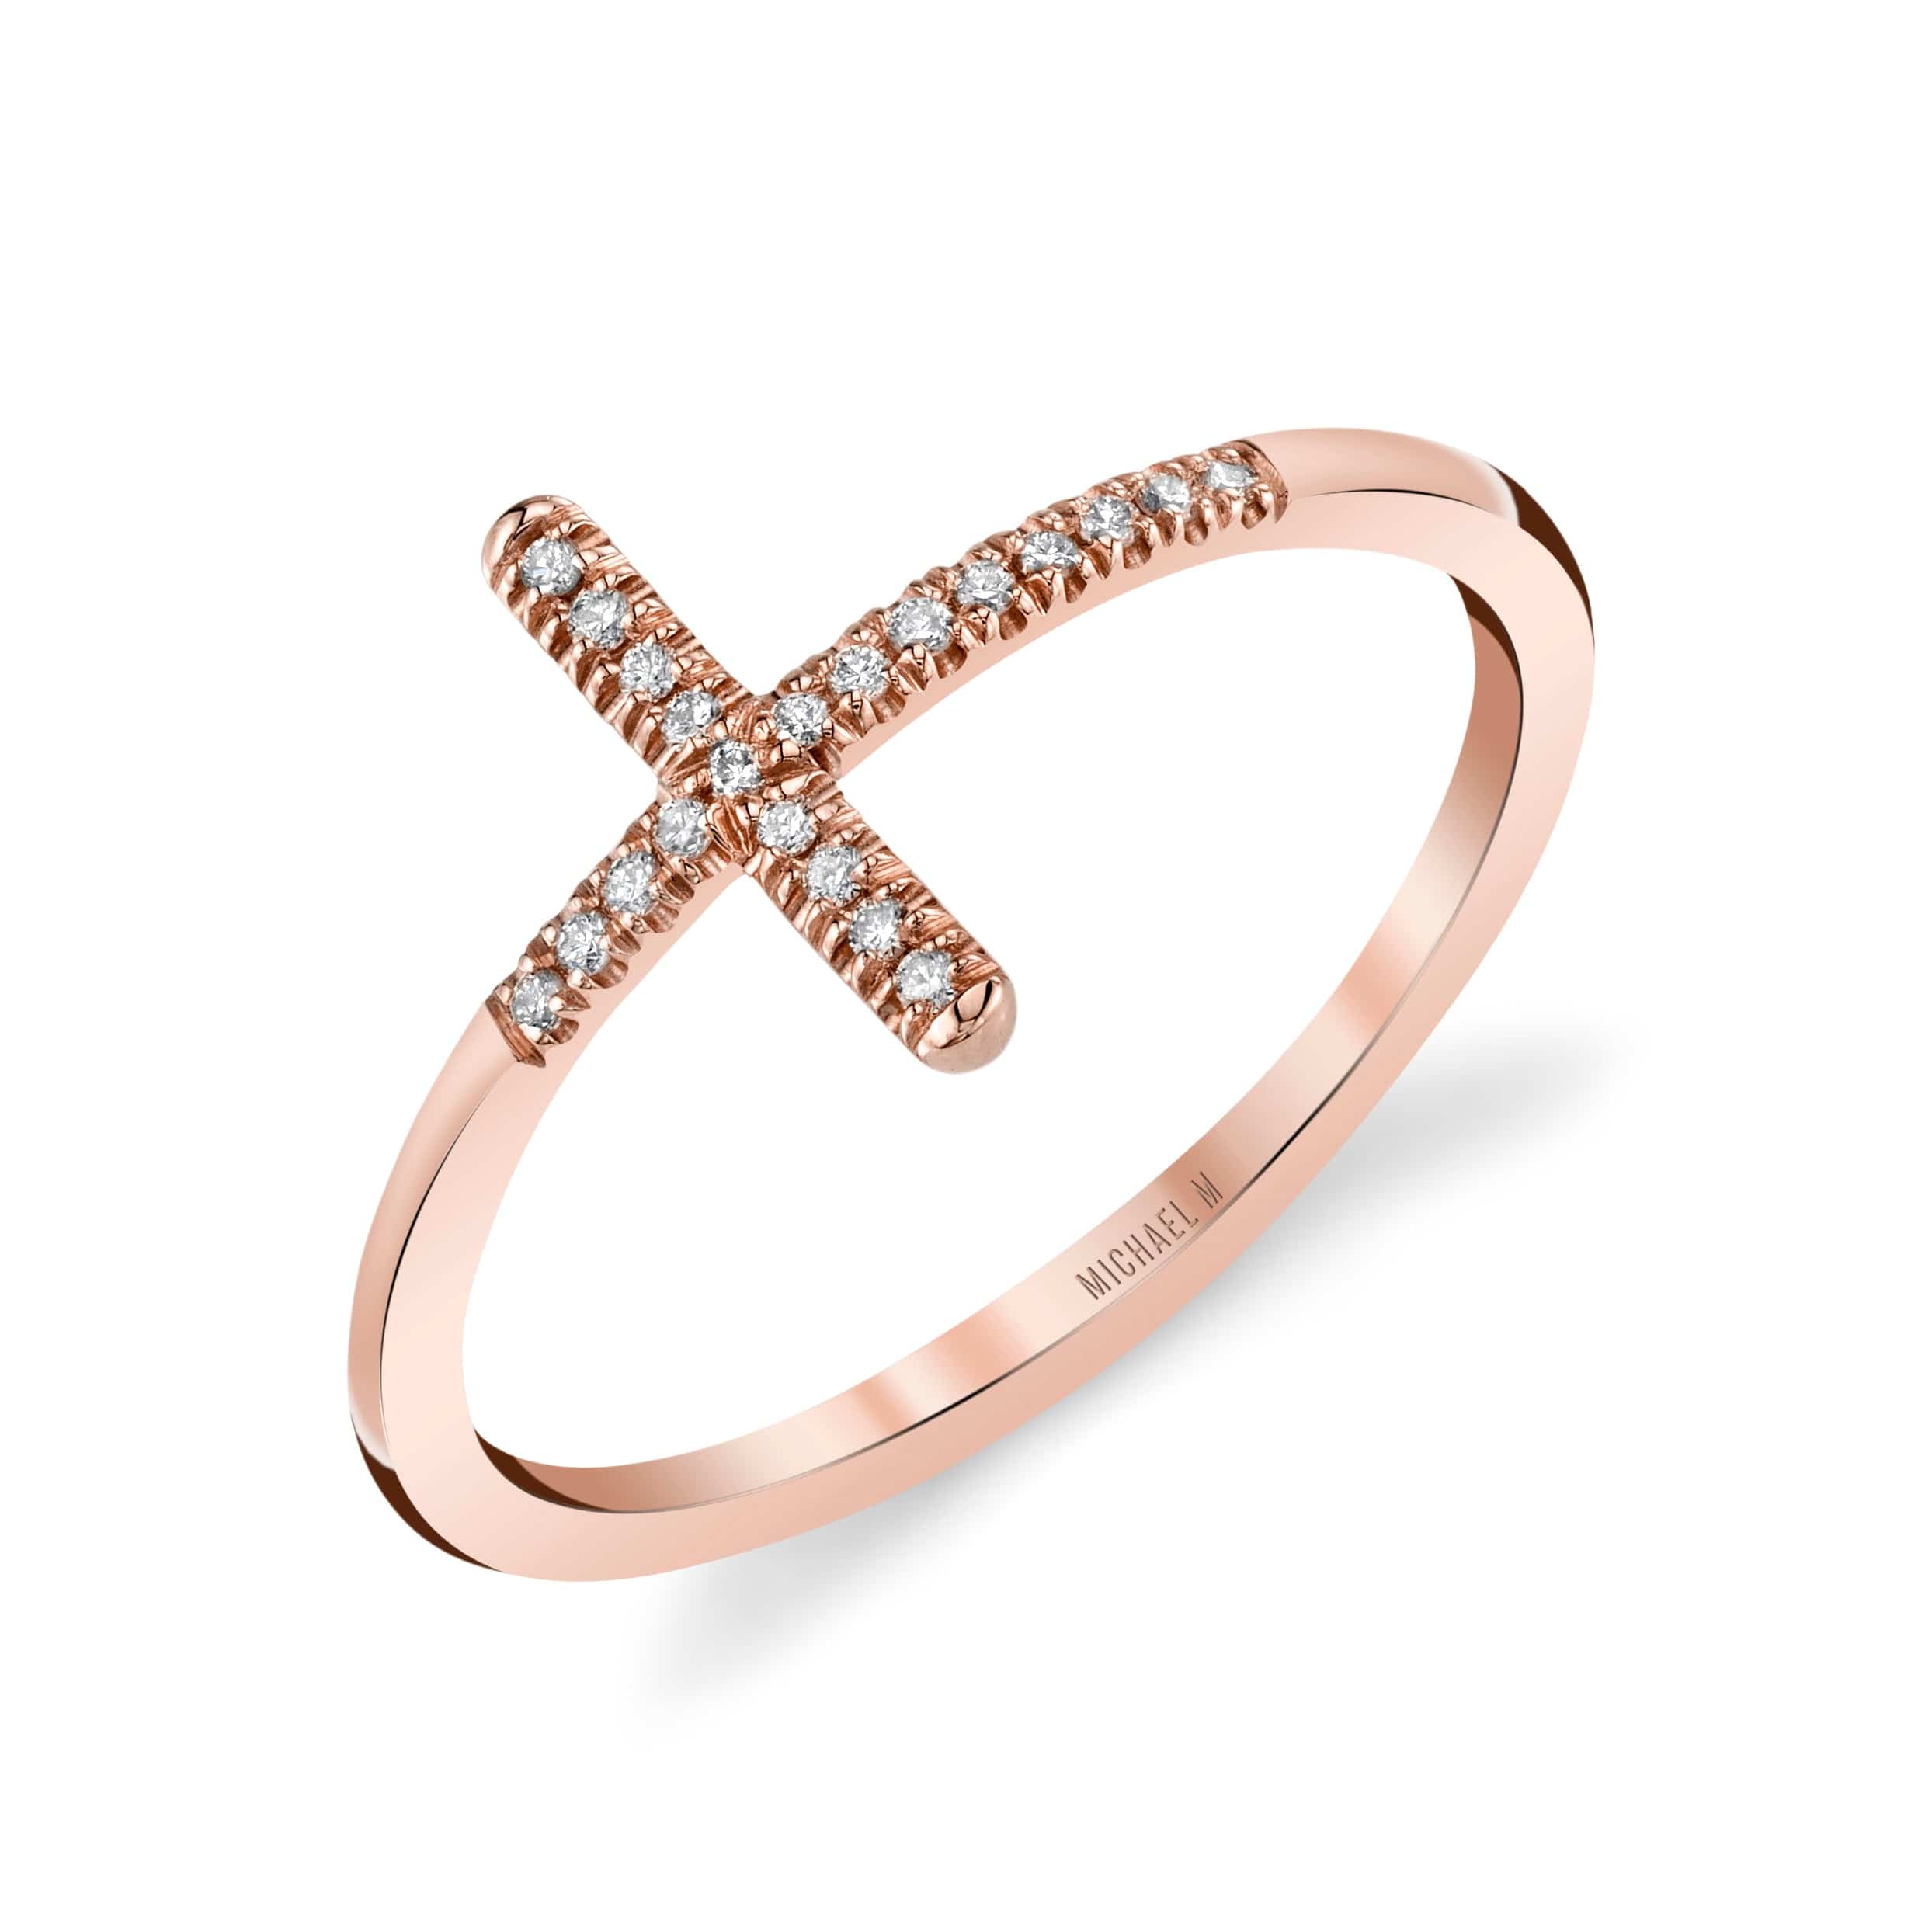 Rose Gold Diamante Crossover Ring Fashion rings, Crossover ring